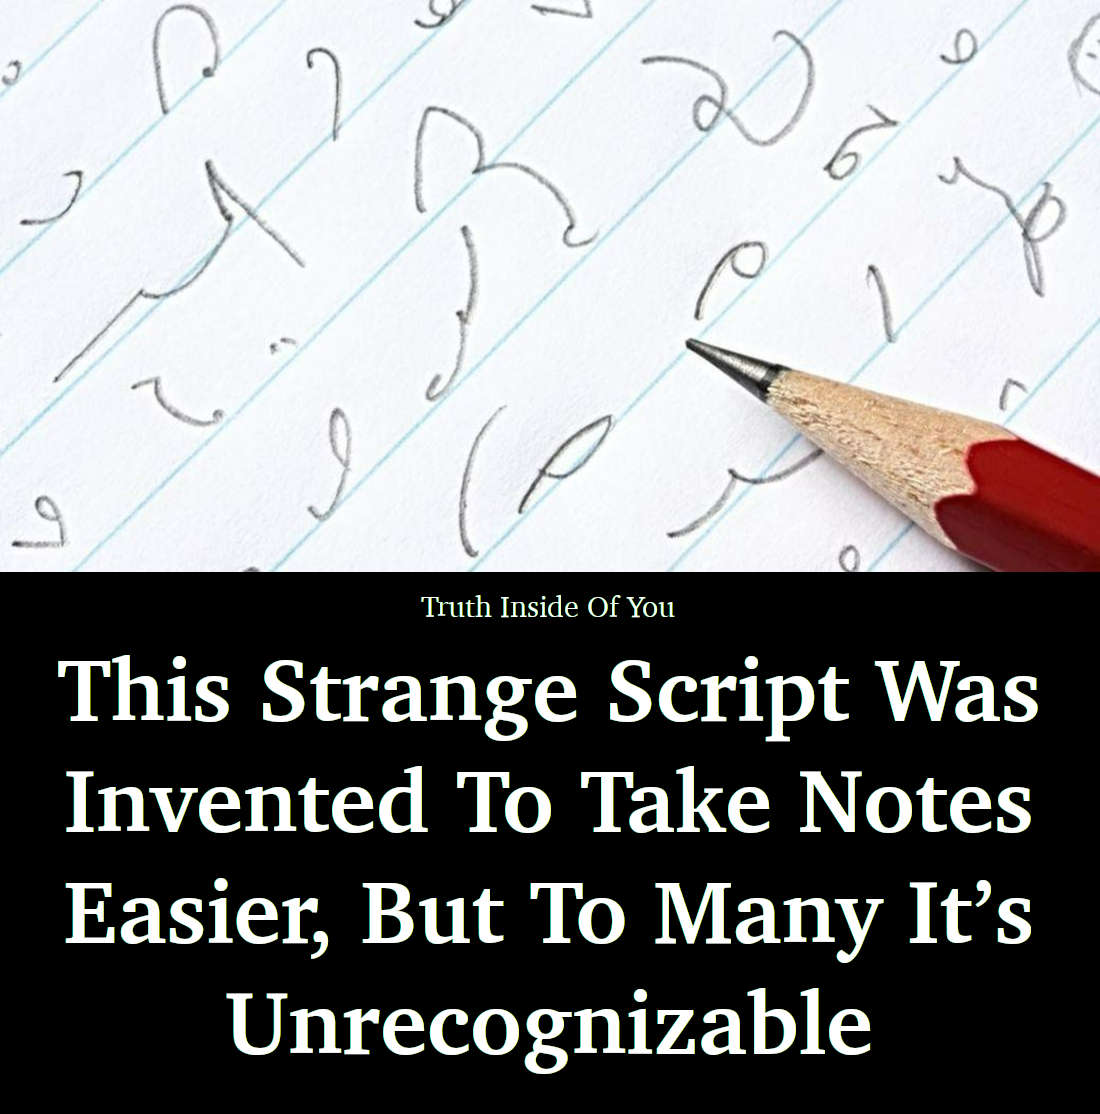 This Strange Script Was Invented To Take Notes Easier, But To Many It’s Unrecognizable